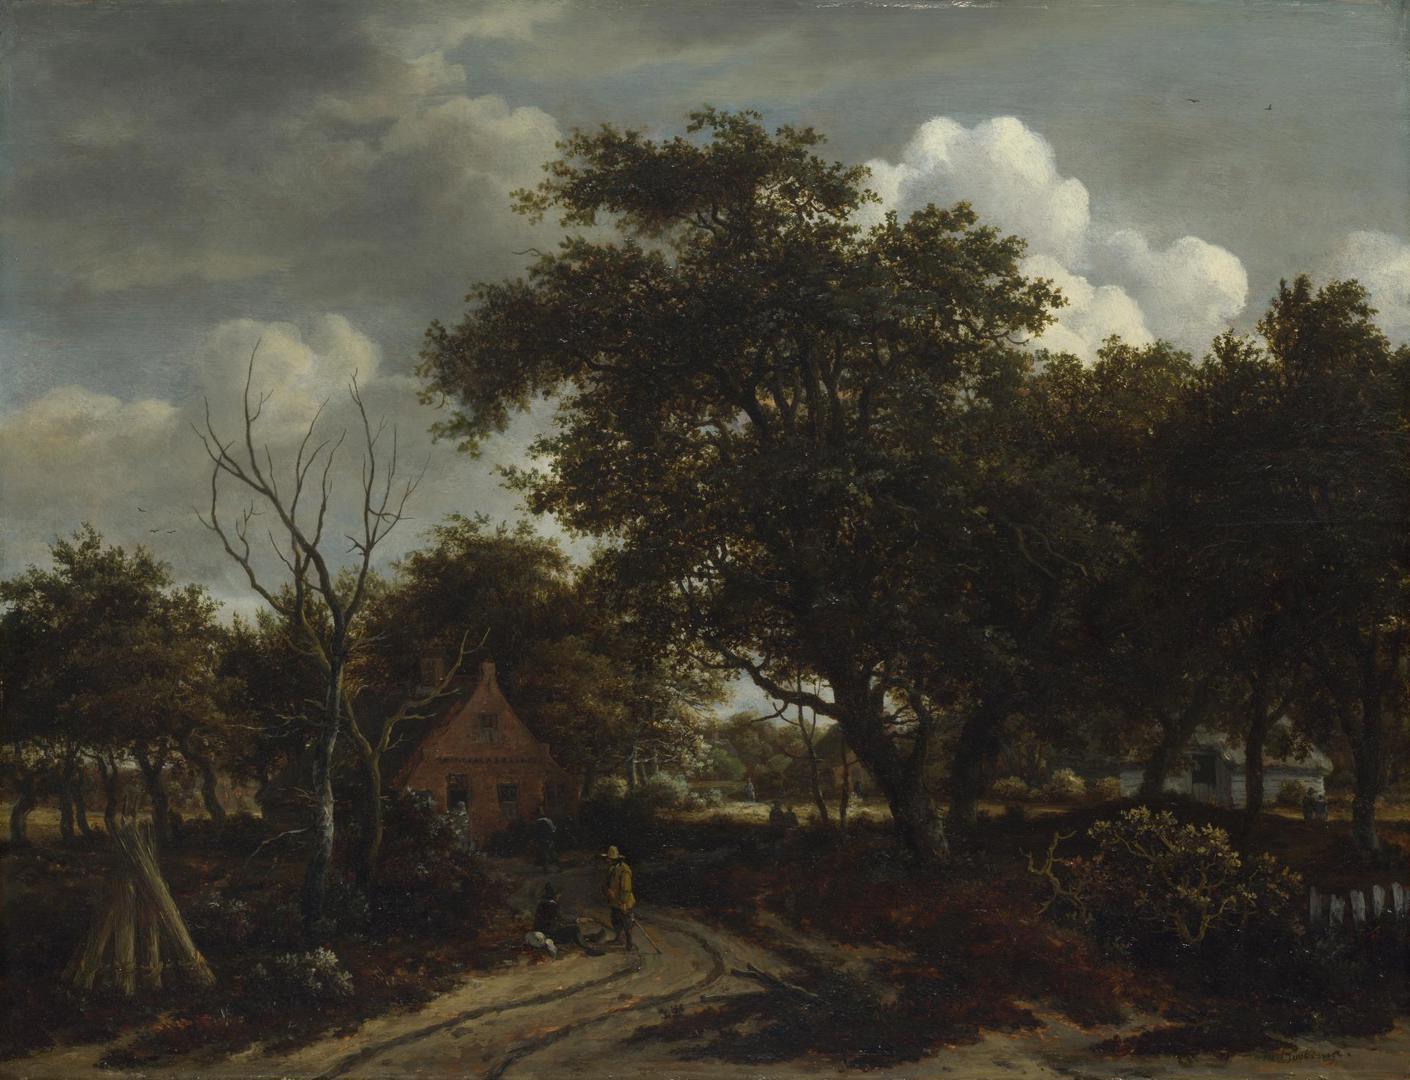 Cottages in a Wood by Meindert Hobbema